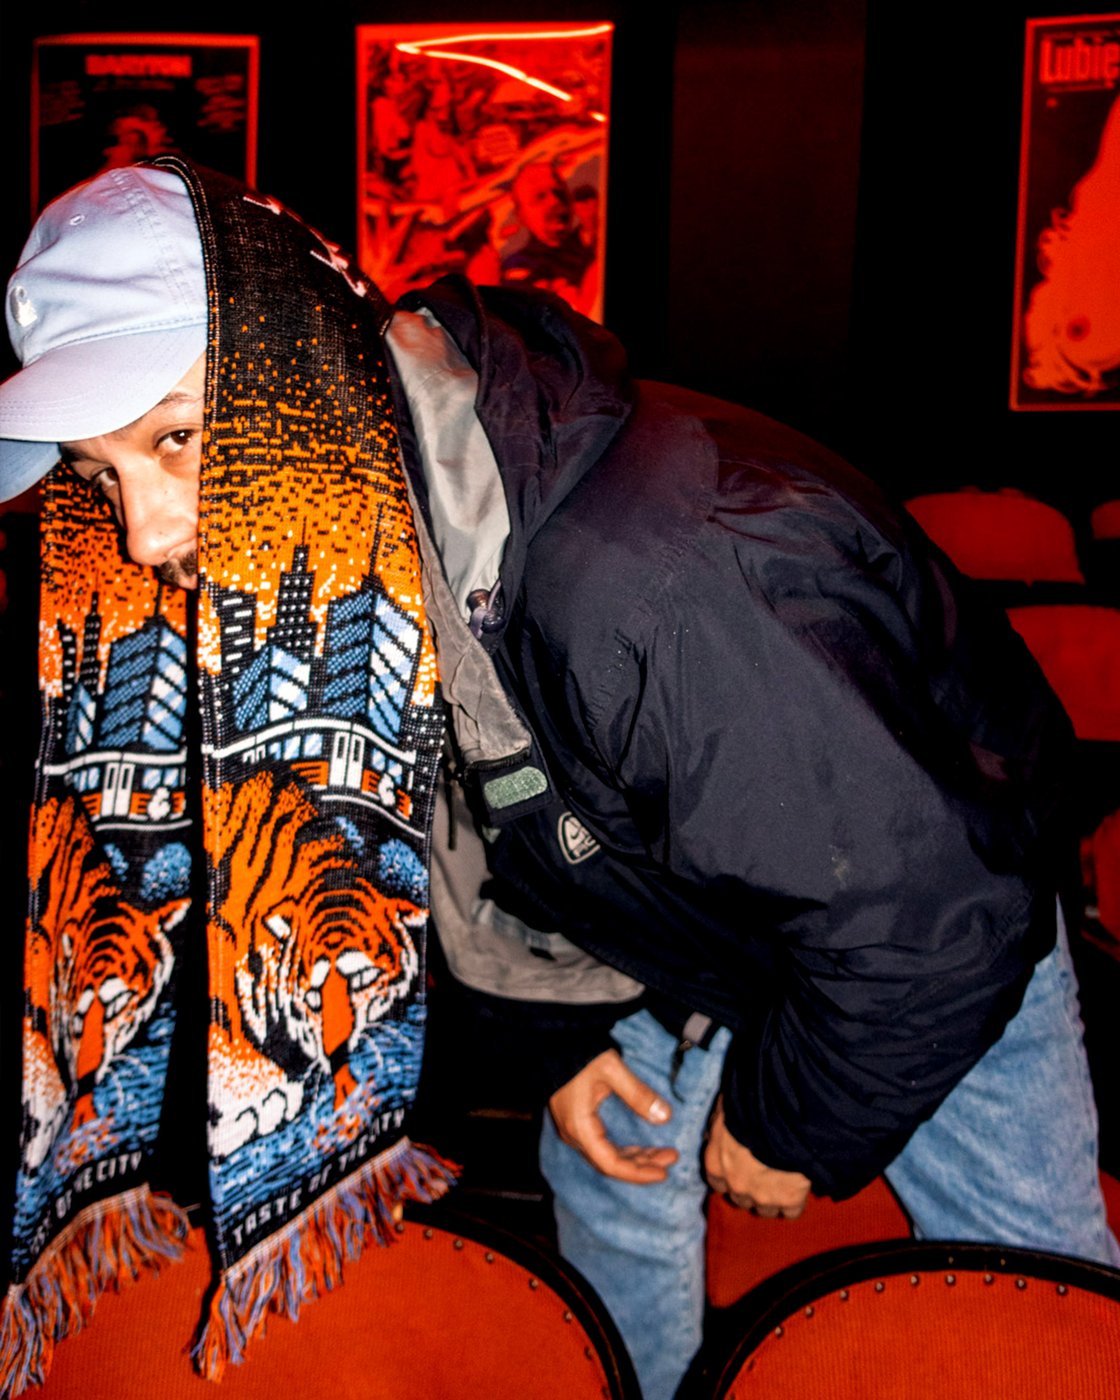 Image of Taste of the city scarf